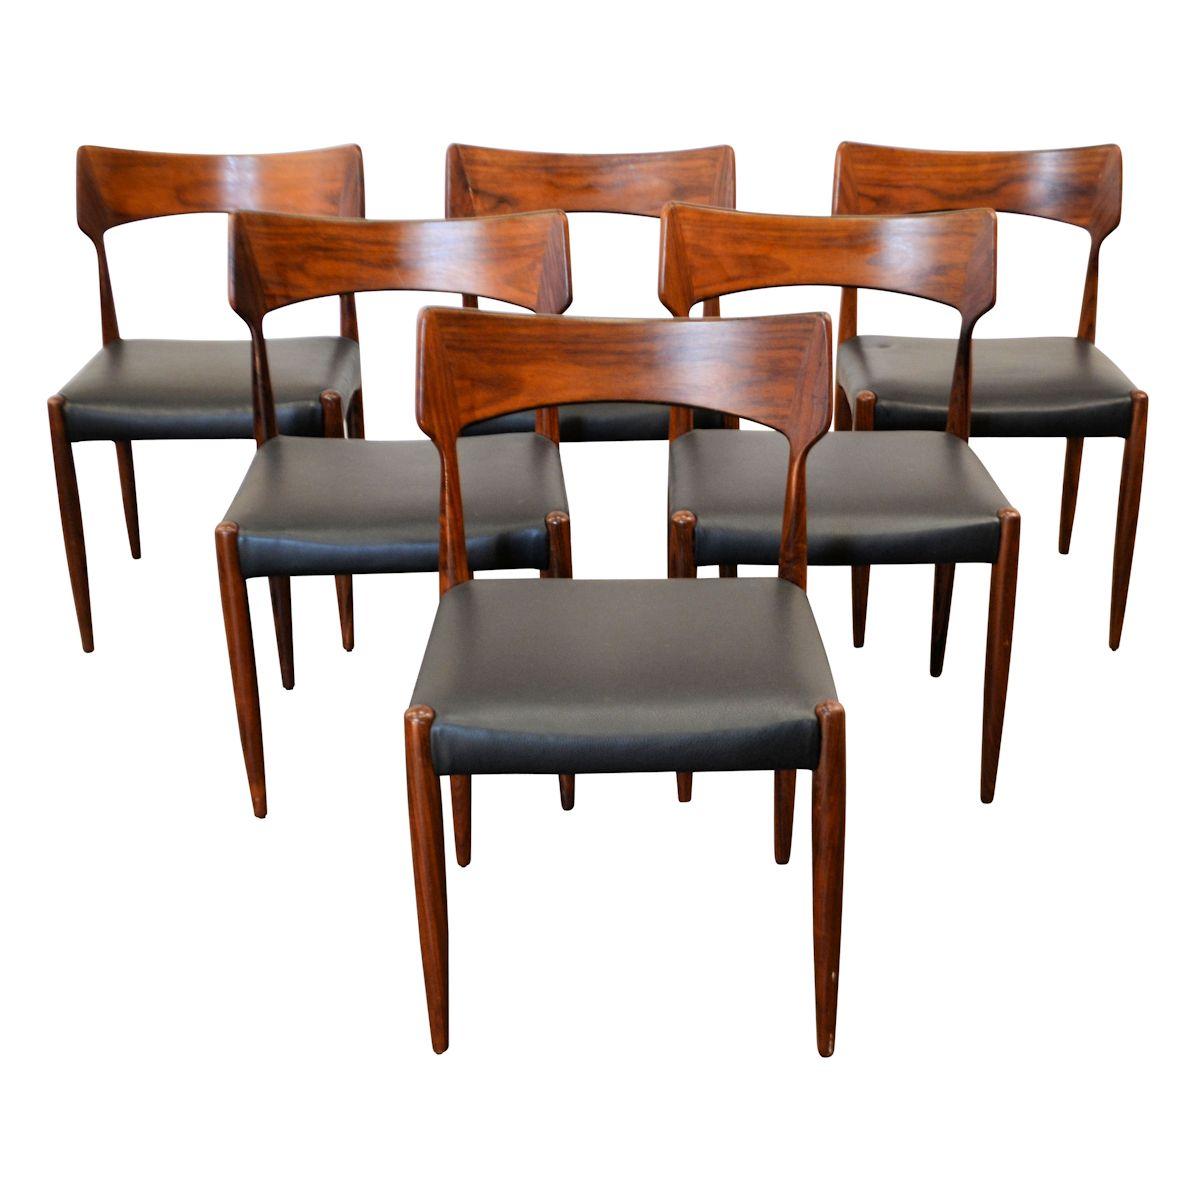 Set of six vintage Danish dining chairs designed and manufactured by Bernhard Pedersen & Son, Denmark. These solid rosewood chairs feature a typical vintage Danish design, gracefully sculpted backrests and black leather seats. High quality design